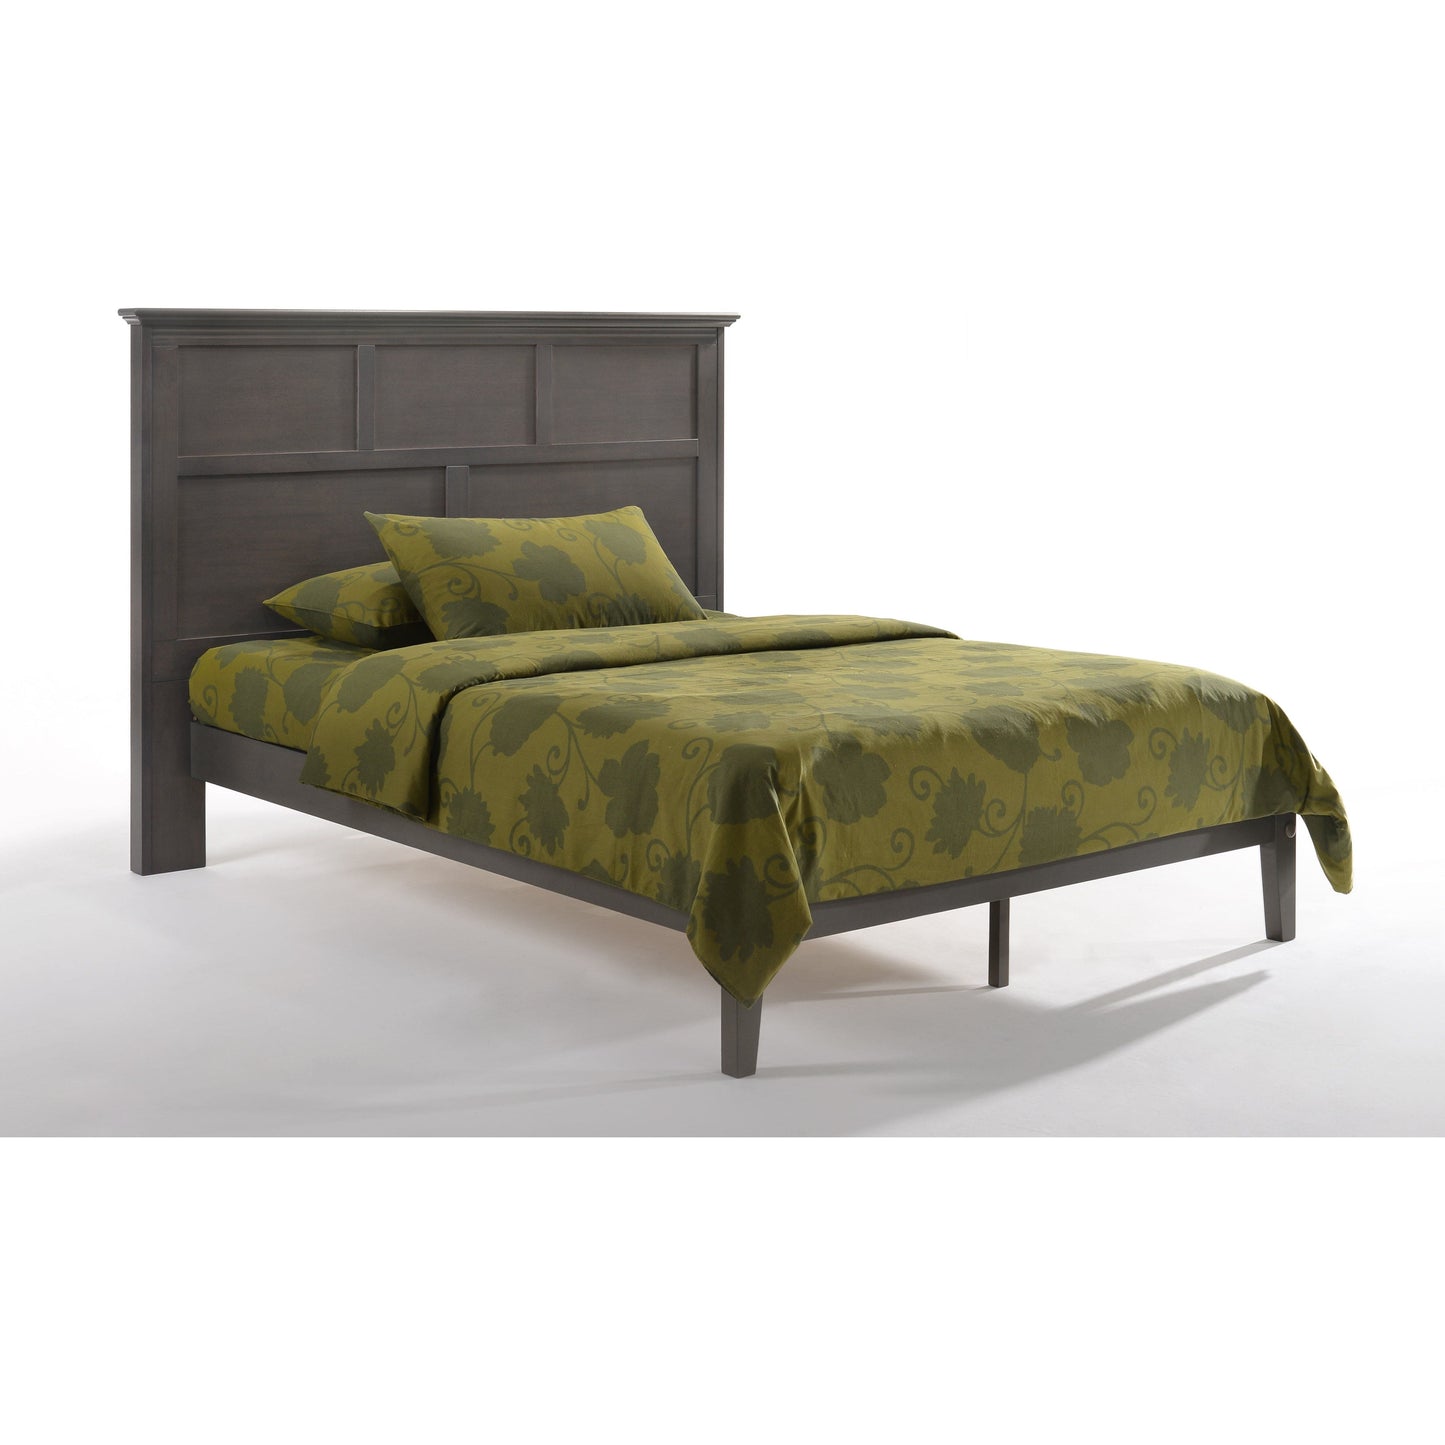 Night And Day Full Tarragon Bed Frame (P Series) in cherry finish Stonewash TAR-PH-FUL-STW-COM